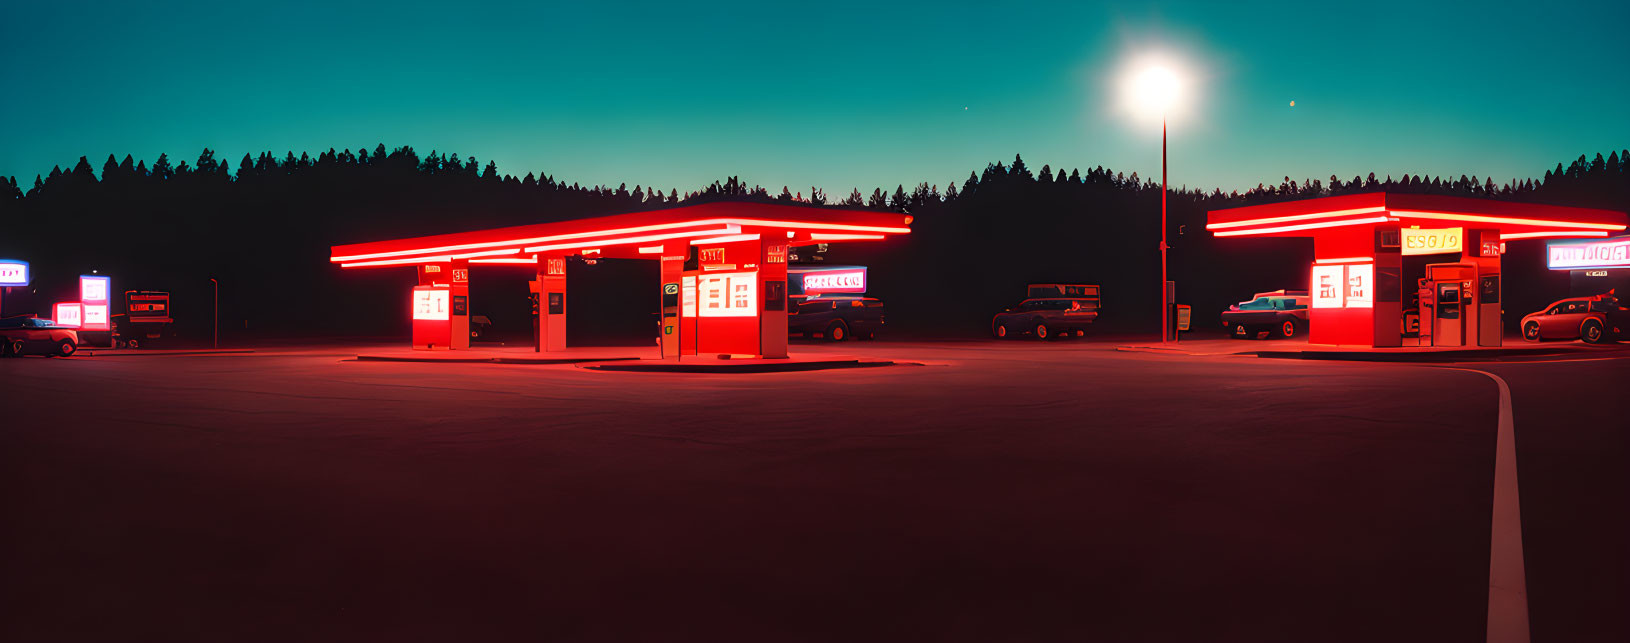 Gas station at night with red neon lights, parked cars, and forest under dark sky